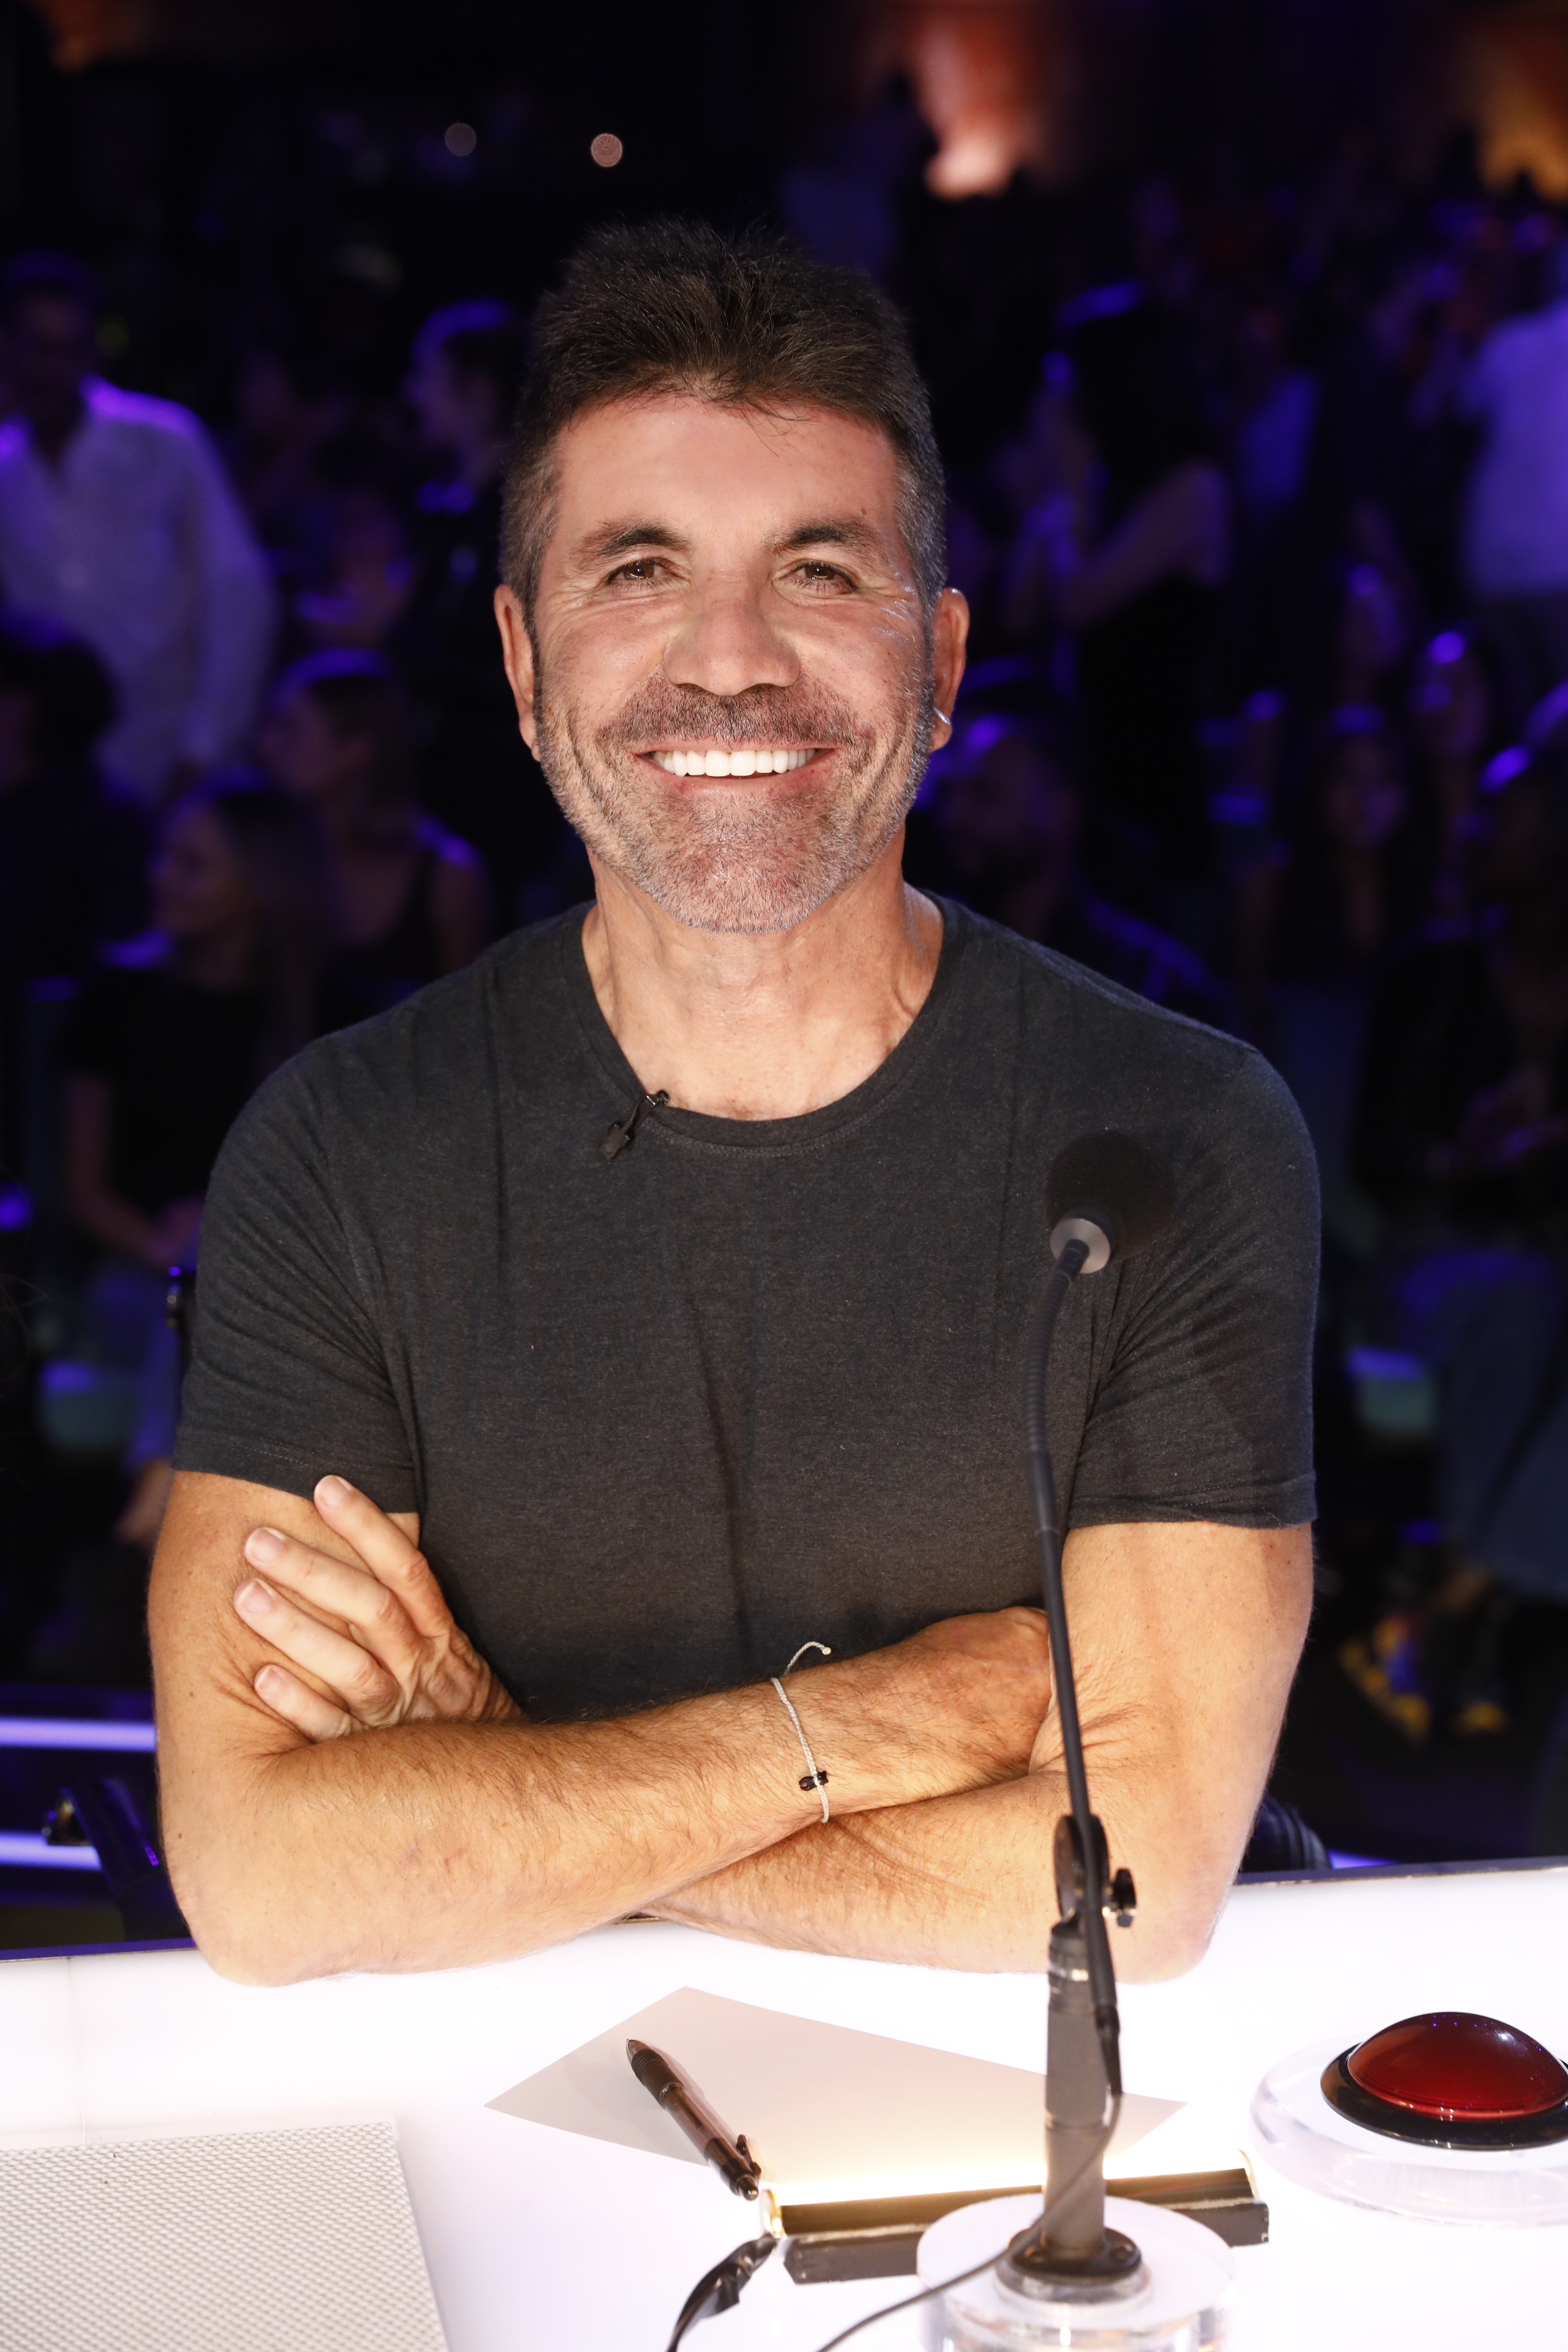 Simon Cowell during the quarterfinals episode of "America's Got Talent" in 2022 | Source: Getty Images